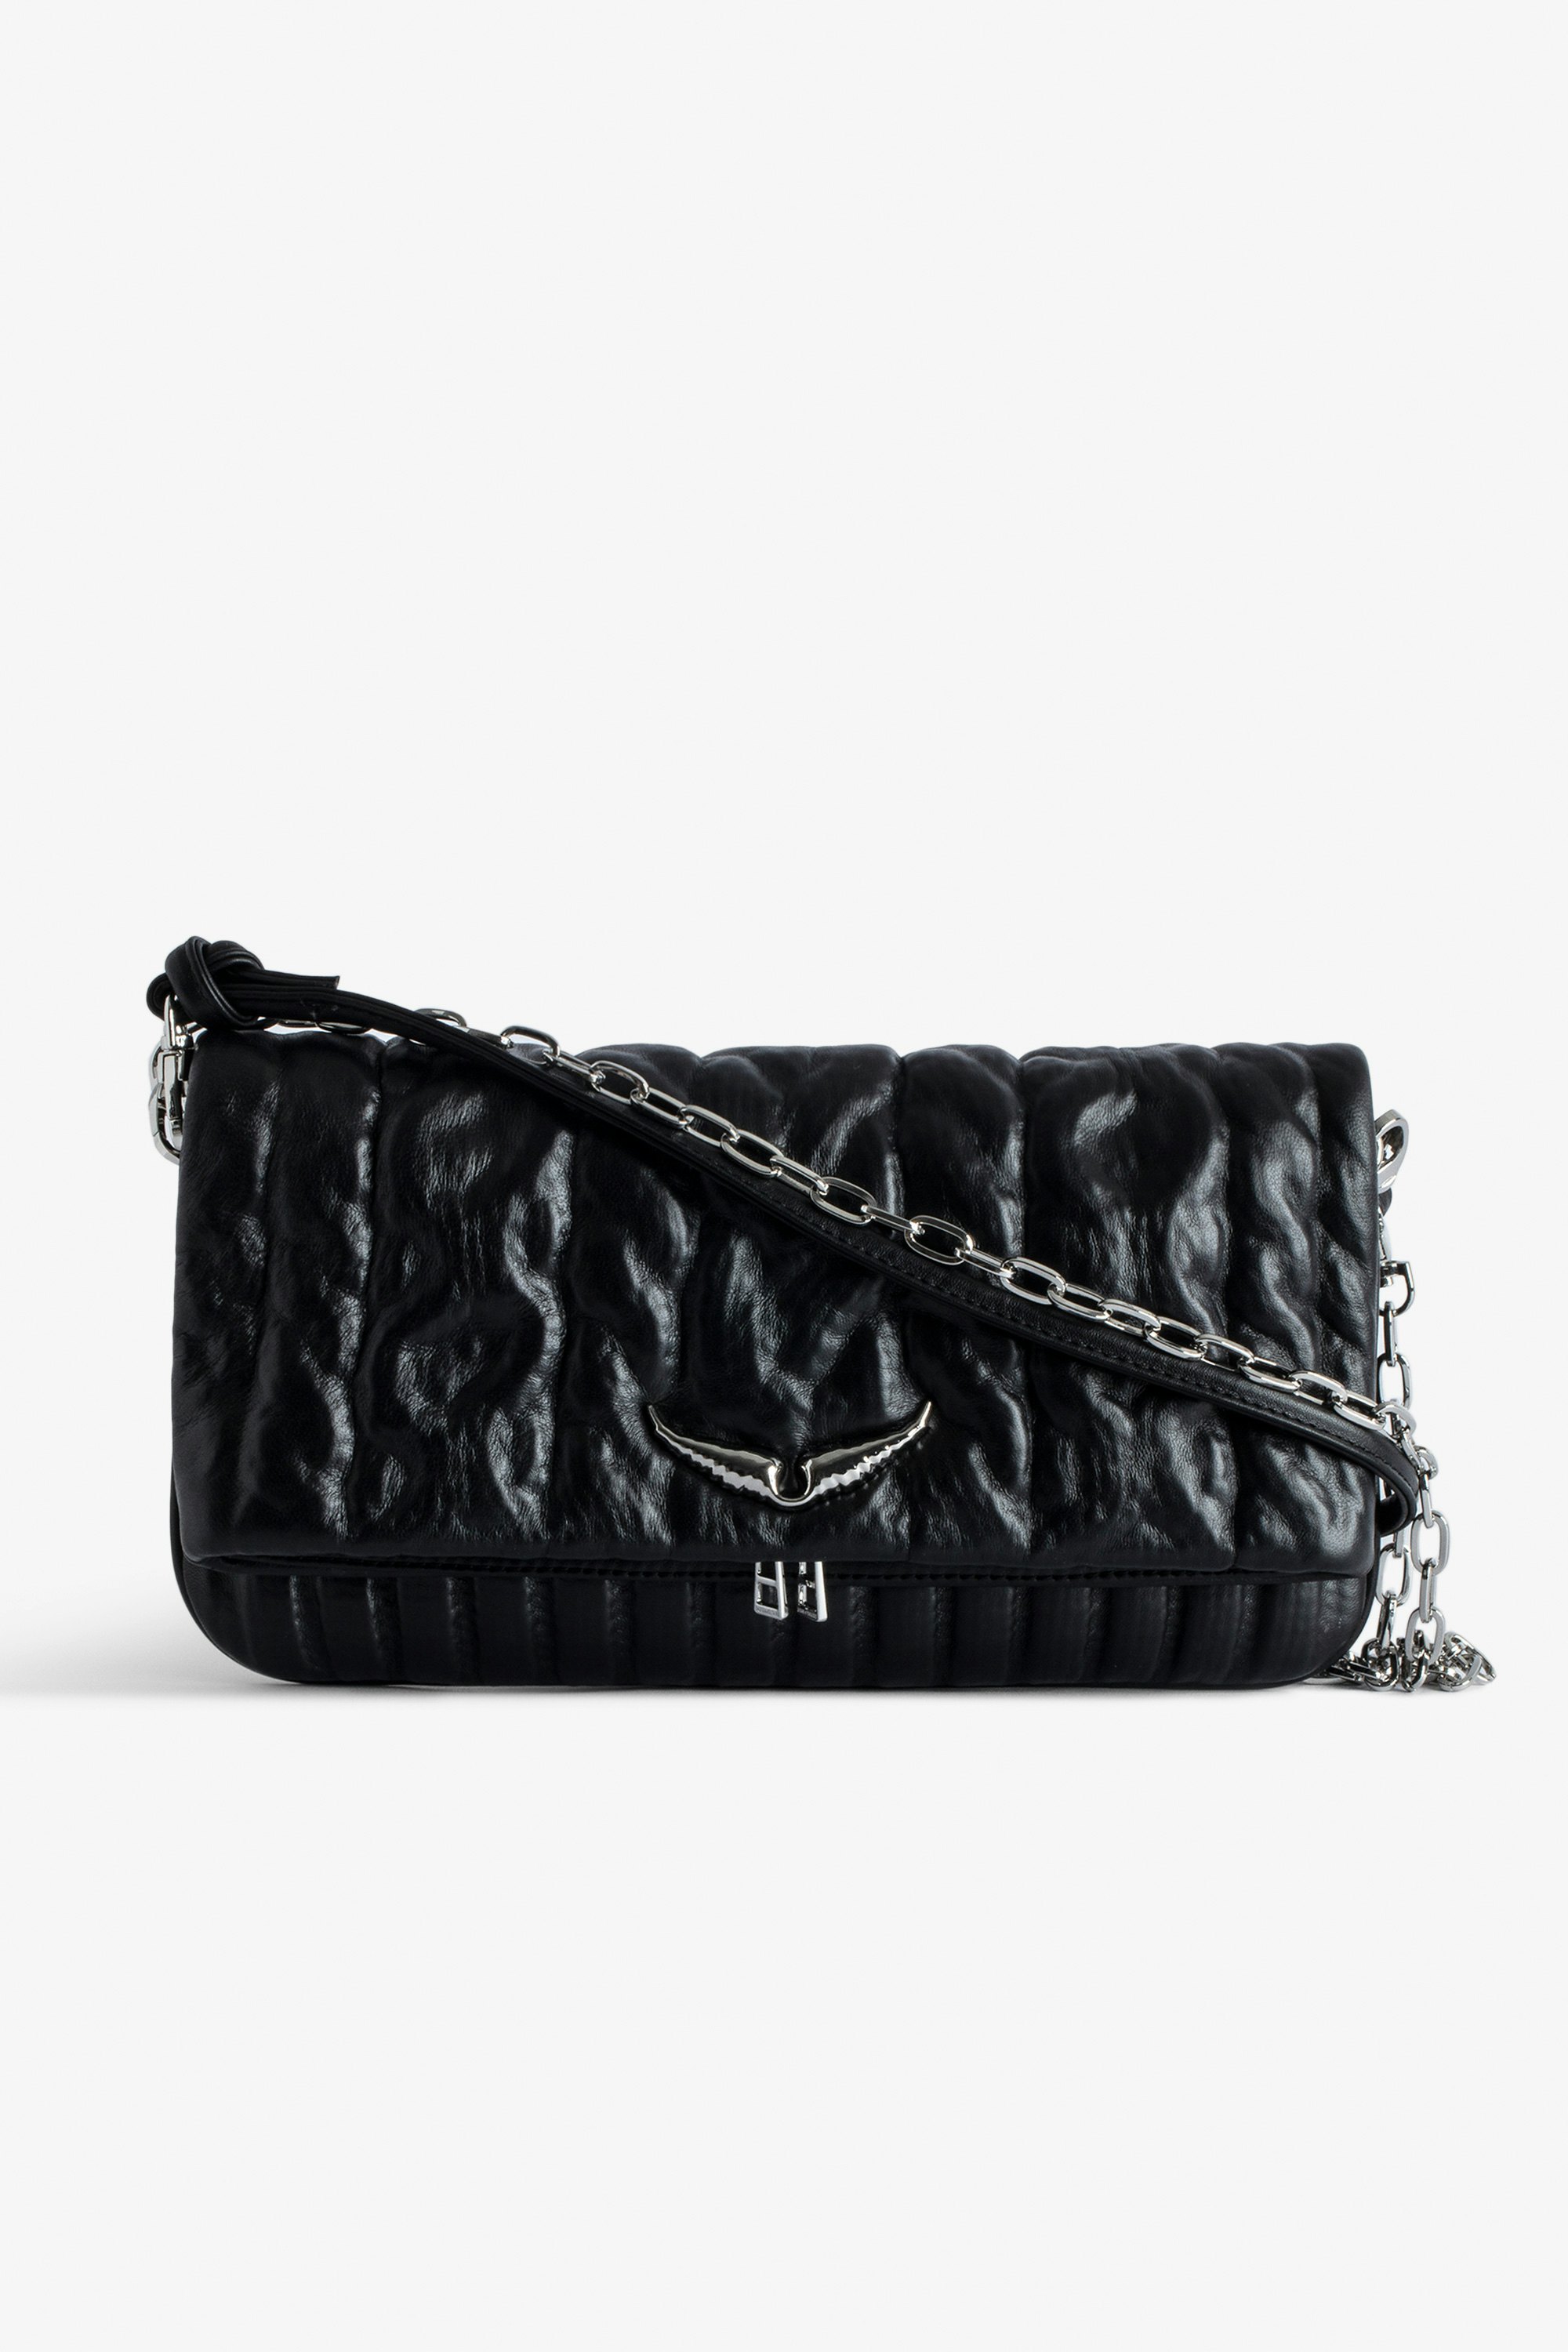 Rock Eternal Knit Shadow Clutch Women’s black knit-effect leather clutch with tied shoulder strap, chain and wings.